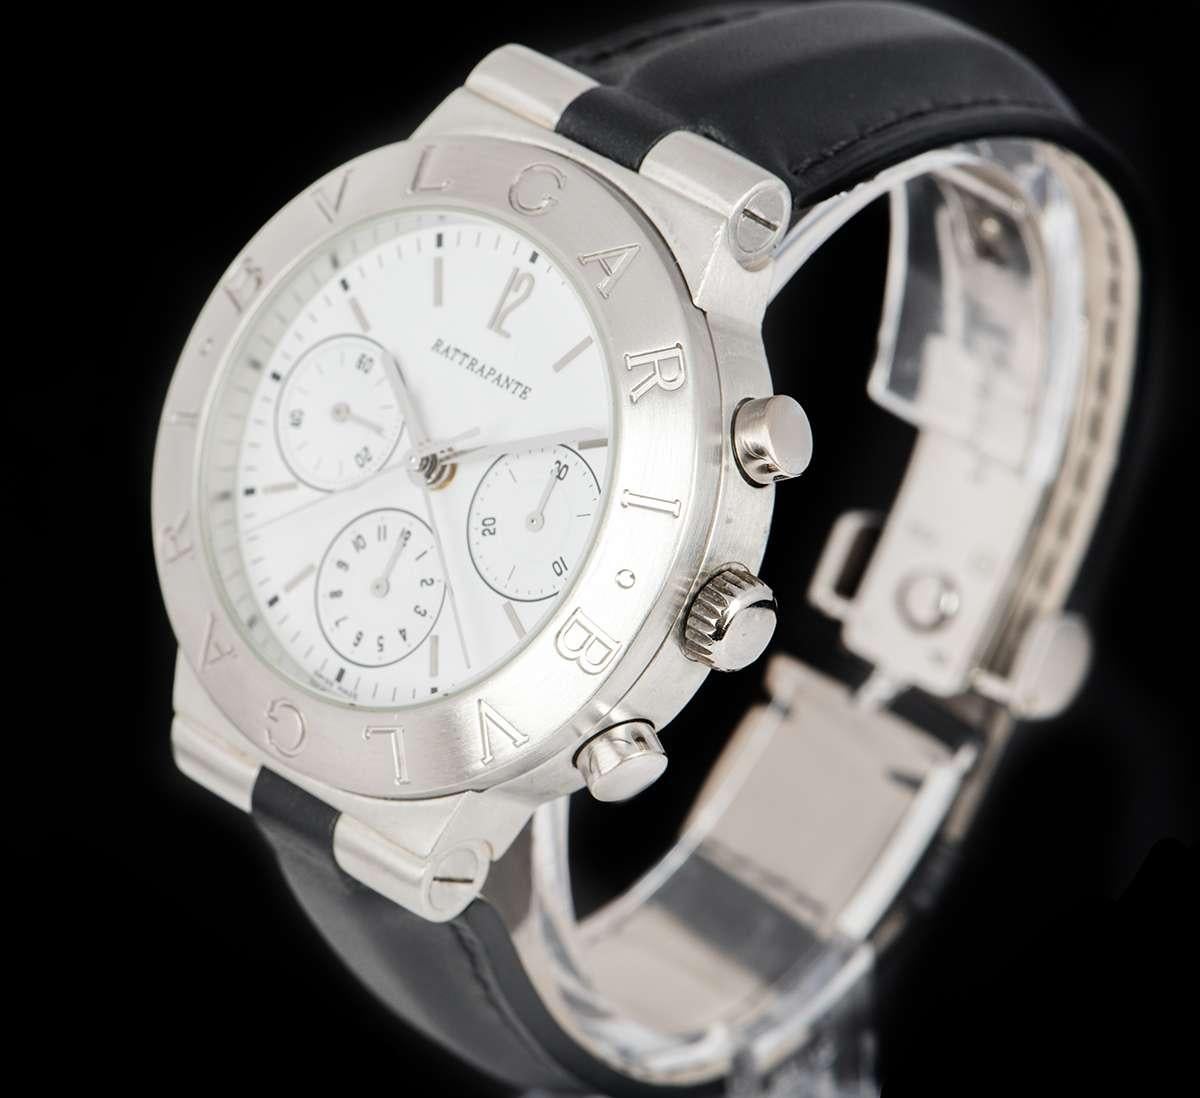 A Platinum Diagono Rattrapante Split Chronograph Gents Wristwatch, white dial with applied index batons and arabic number 12, 30 minute recorder at 3 0'clock, 12 hour recorder at 6 0'clock, small seconds at 9 0'clock, a fixed platinum bezel, a brand